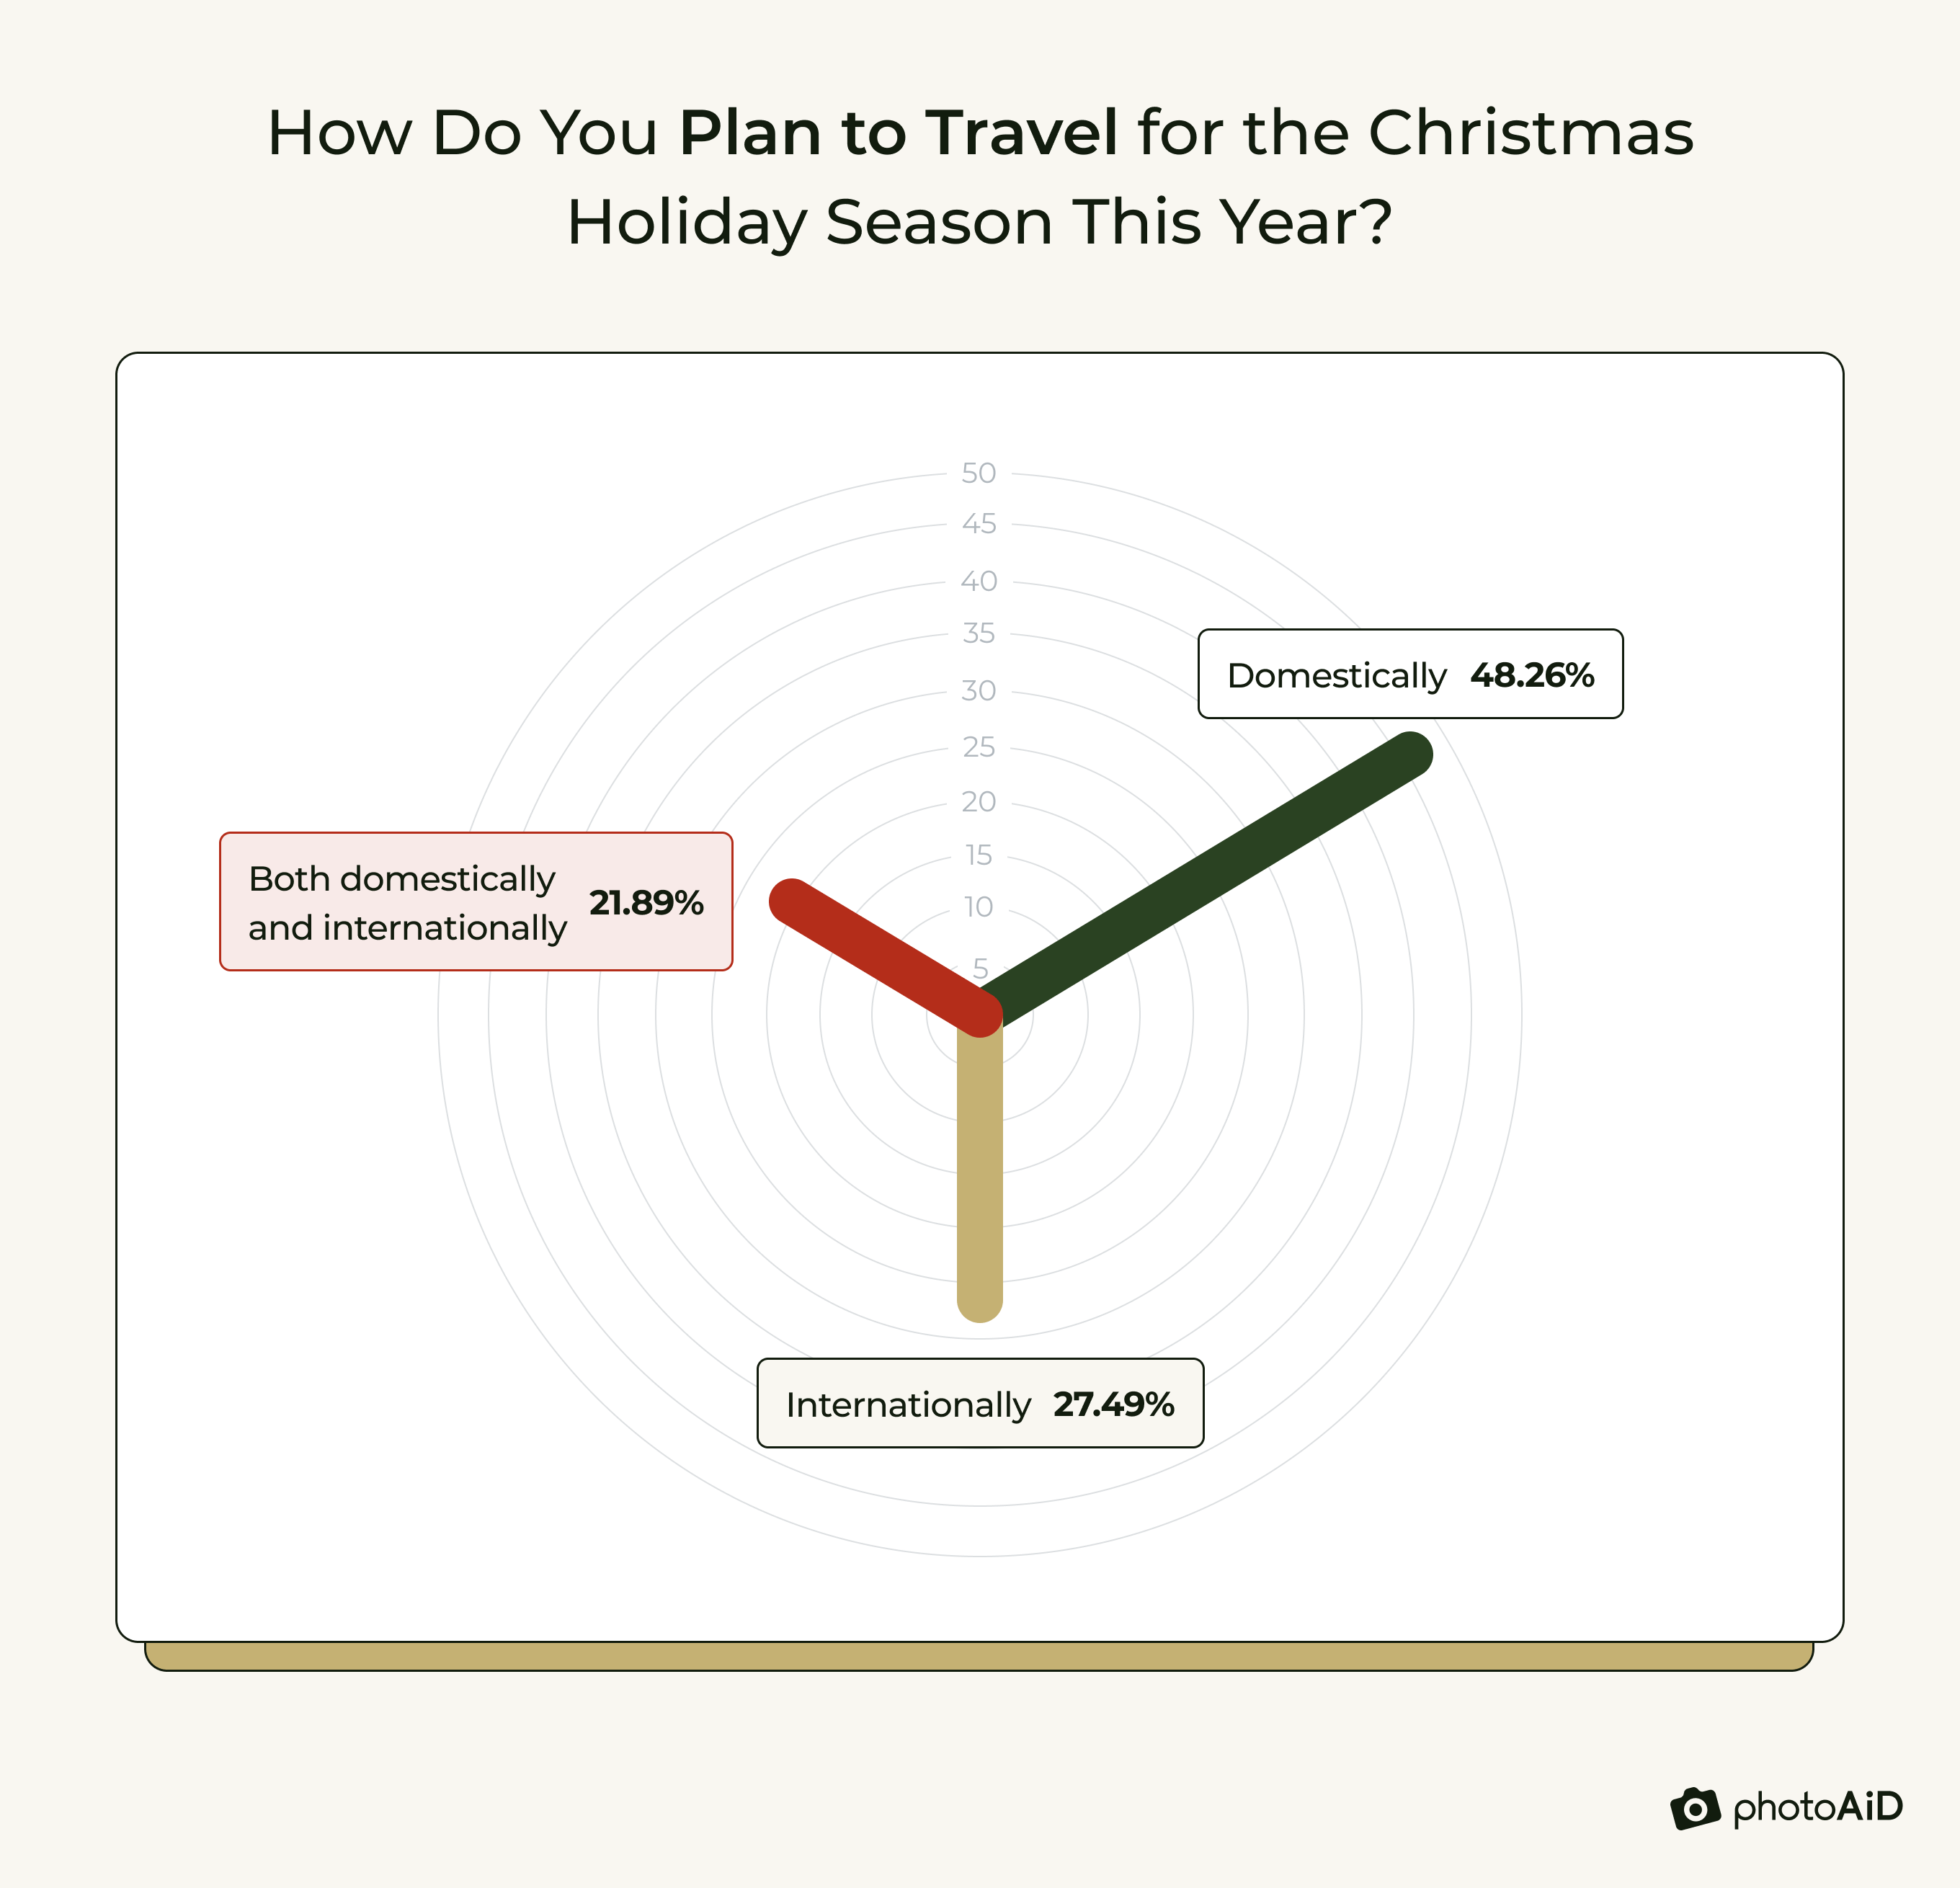 People's travel preferences for Christmas, highlighting domestic, international, and combined travel choices